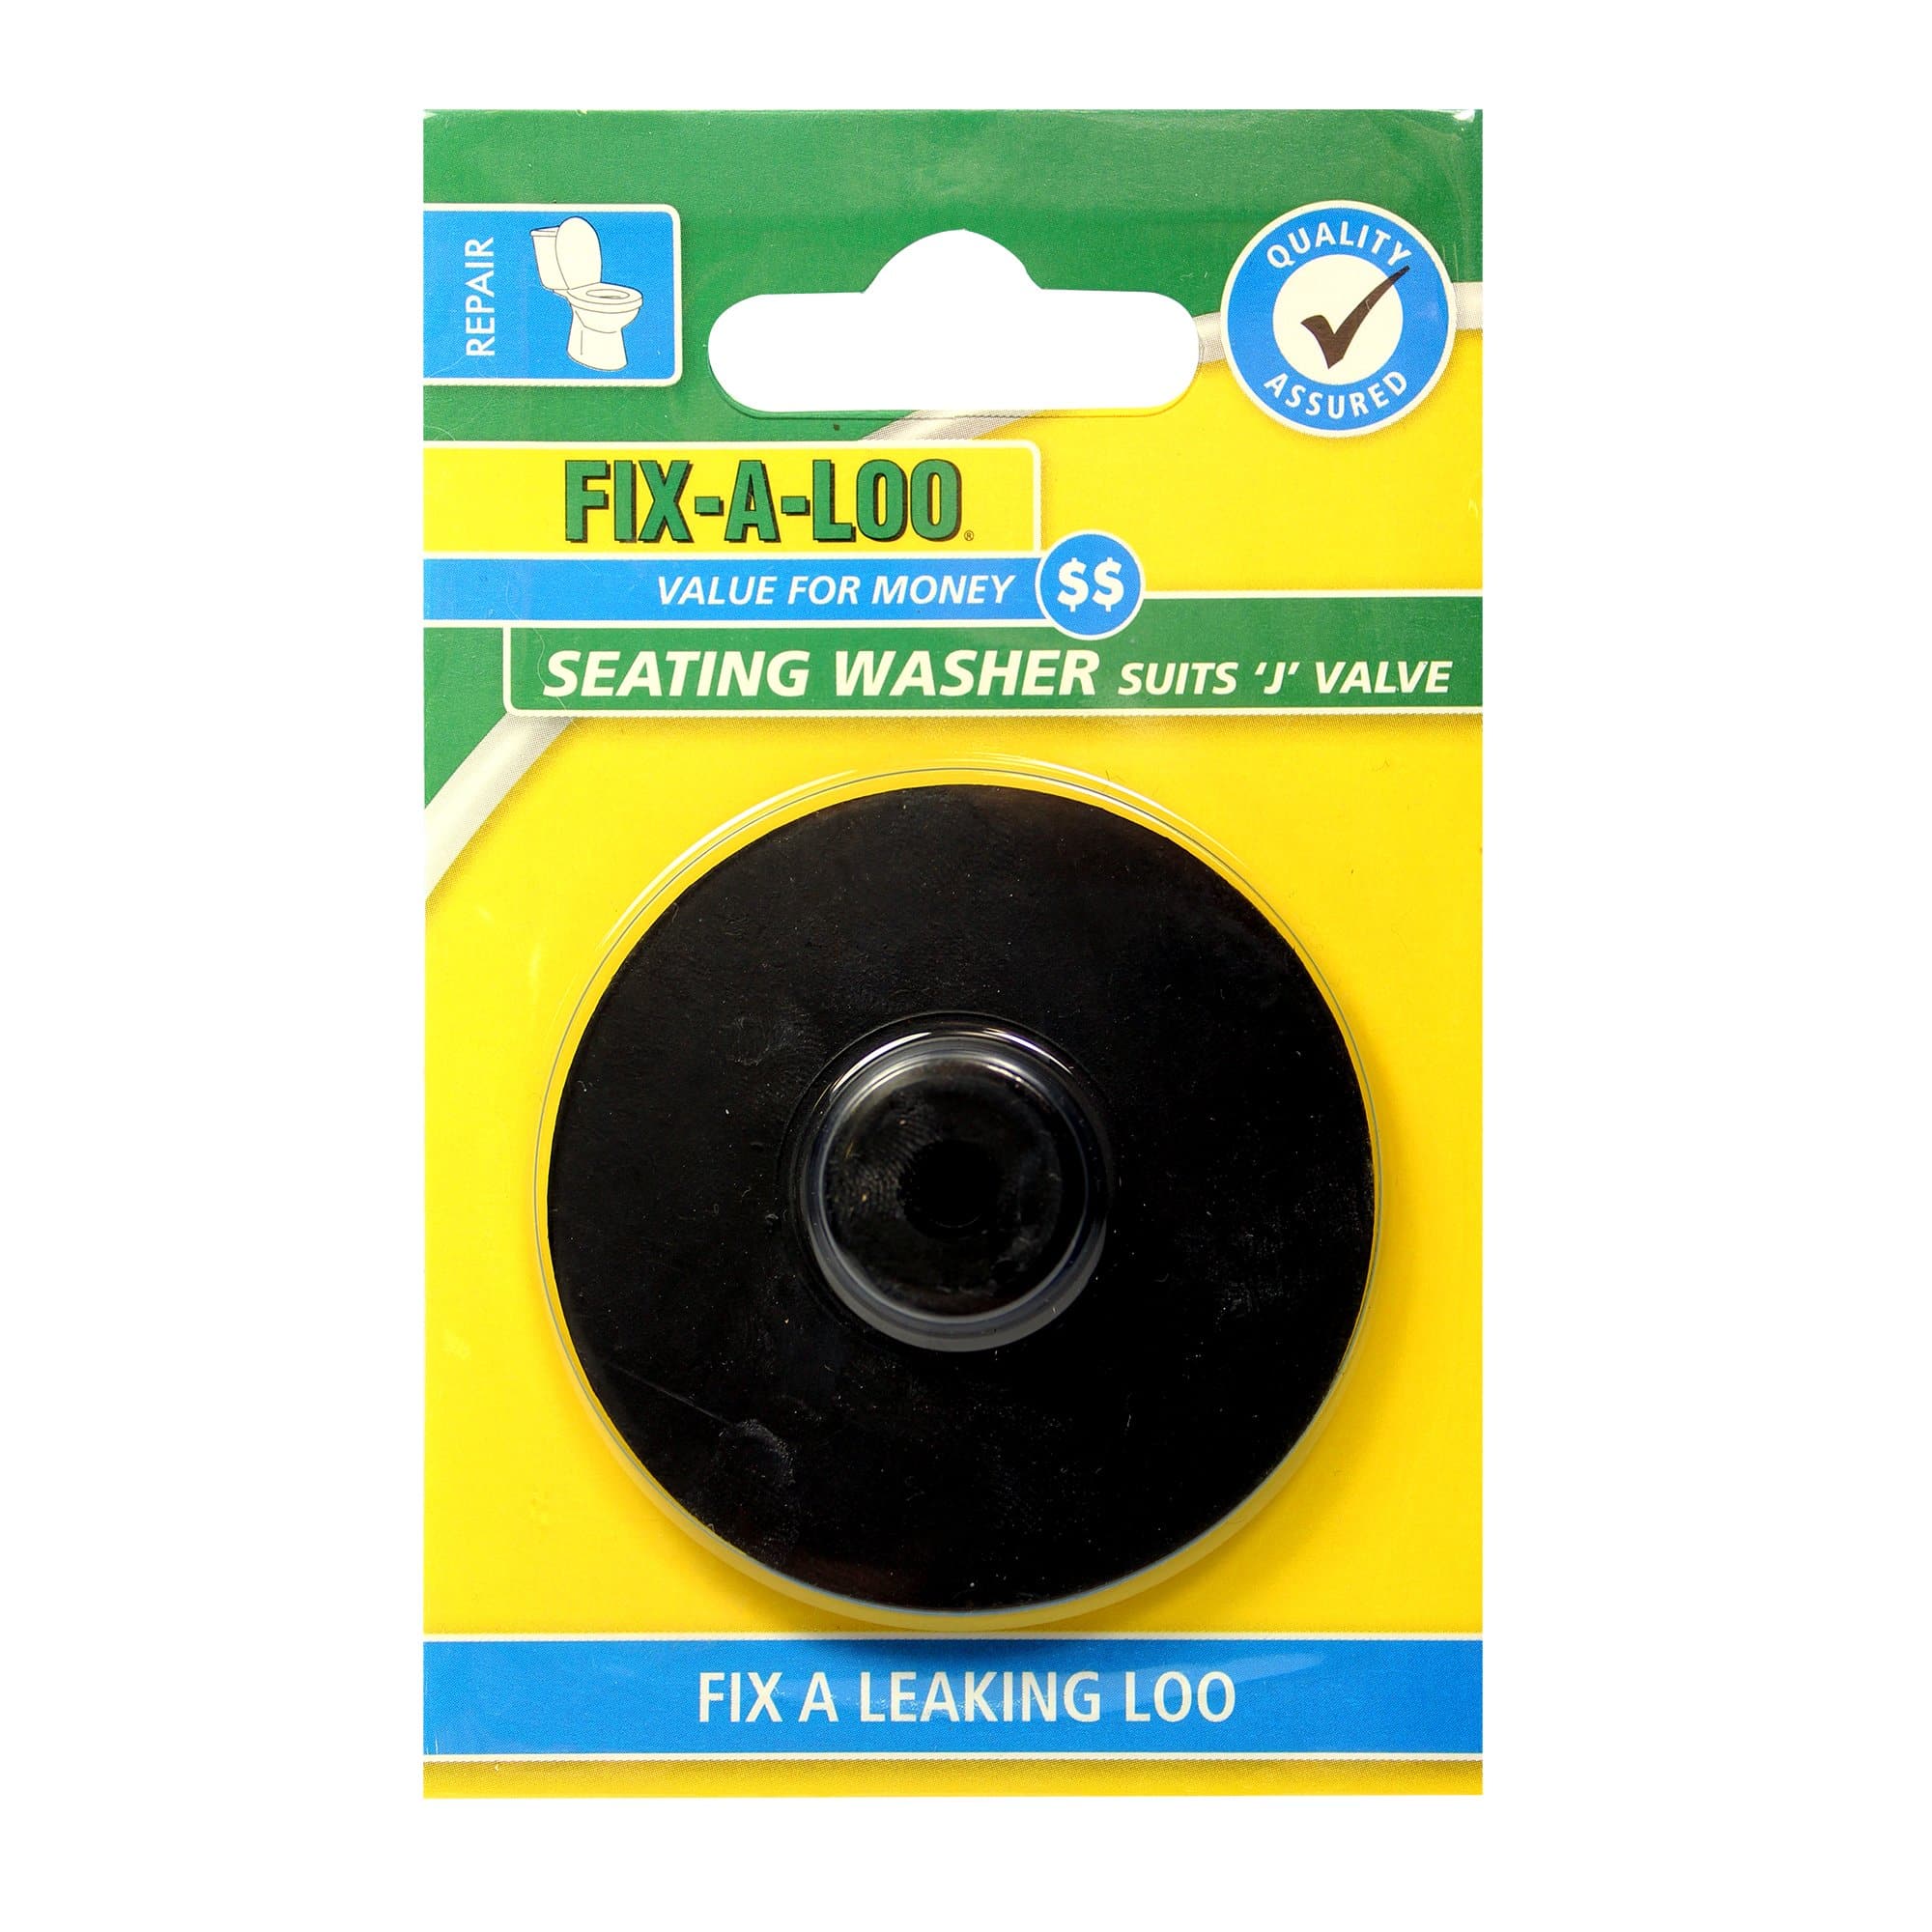 FIX-A-LOO Seating Washer Suits "J" Valves 226273 - Double Bay Hardware